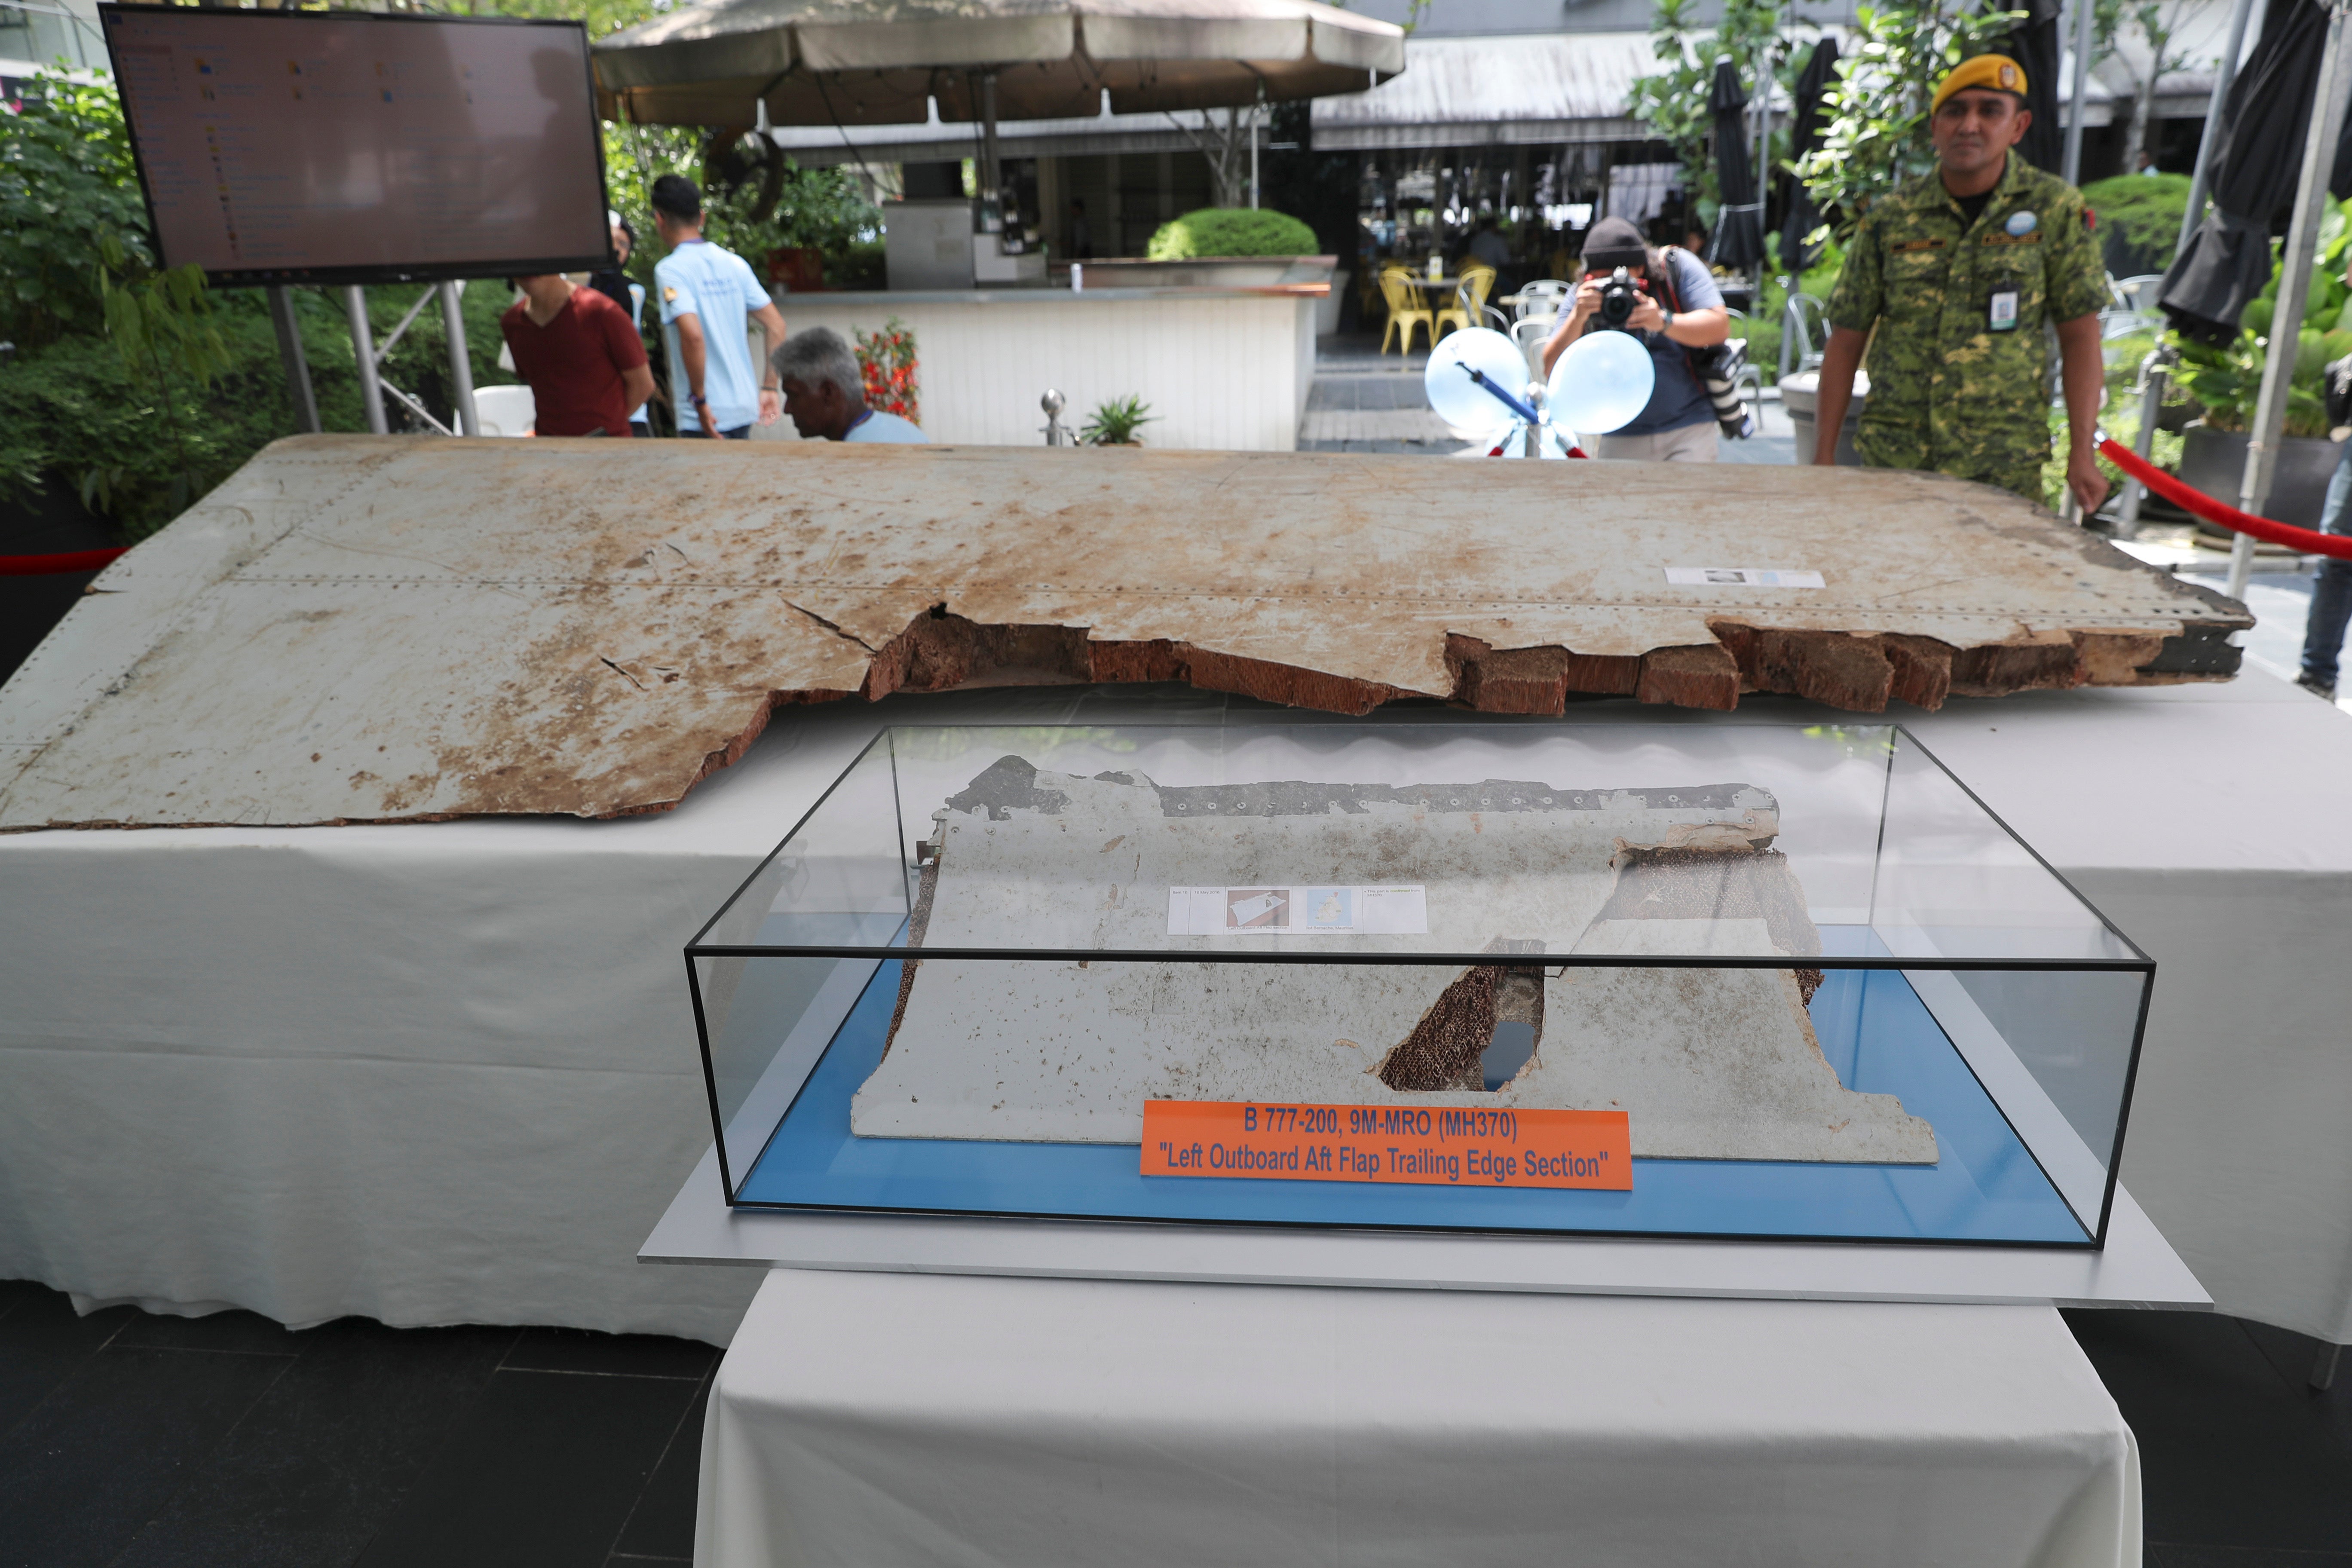 Debris from the missing Malaysia Airlines Flight MH370 is displayed during a Day of Remembrance for MH370 event in Kuala Lumpur, Malaysia